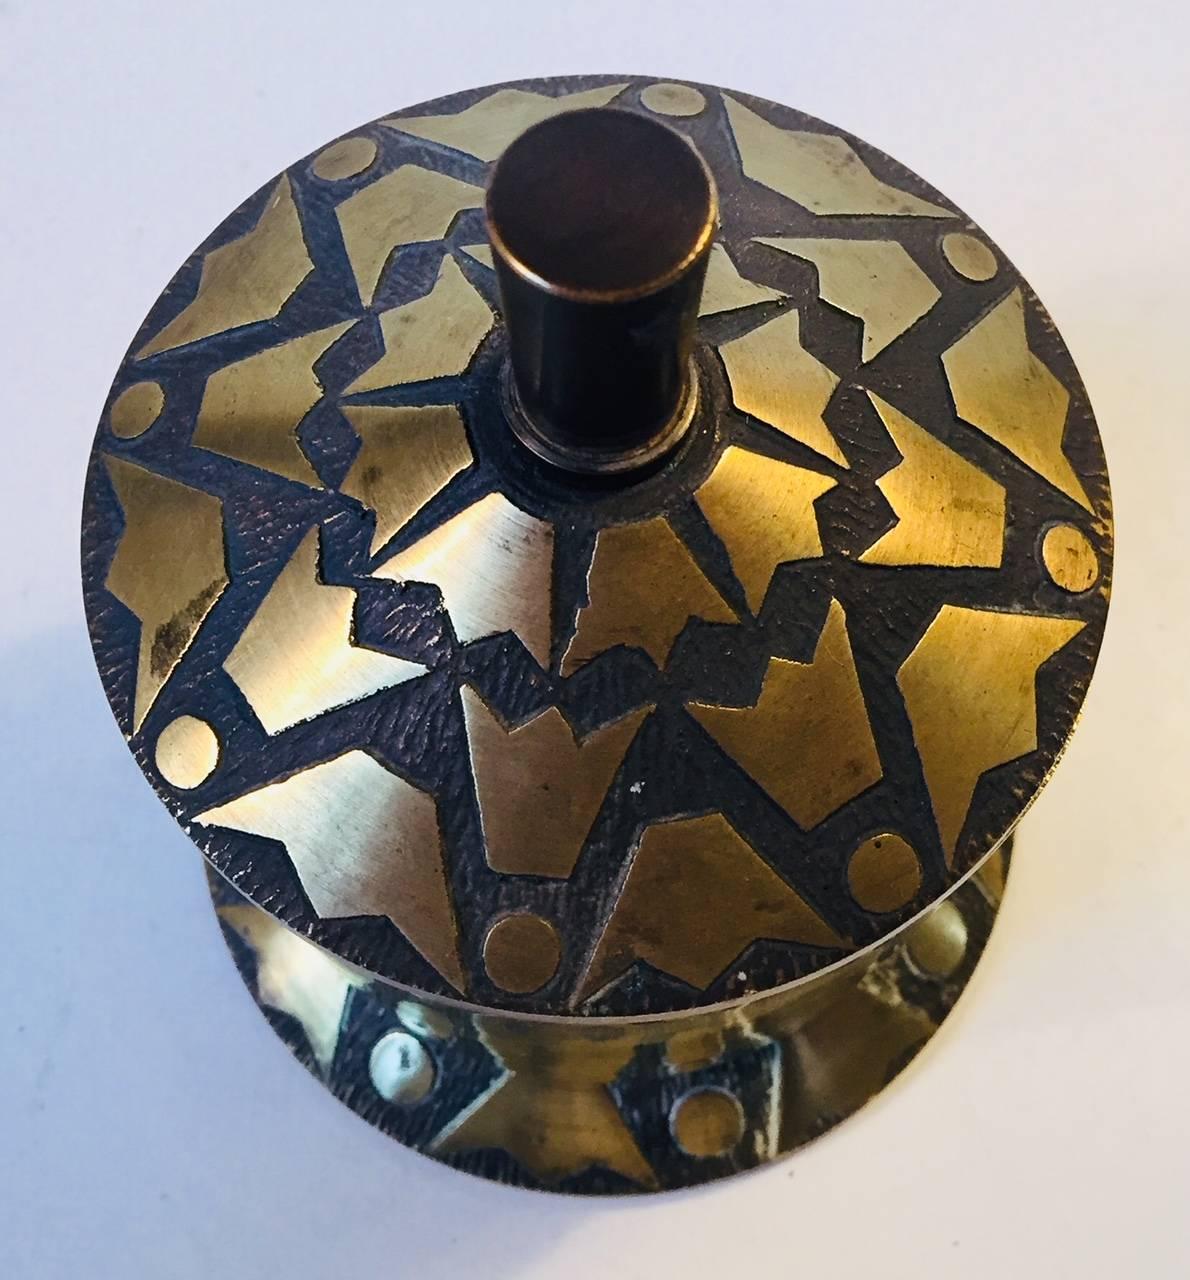 Lidded bronze jar, trinket or cigarette container decorated with crown motif's. Manufactured and designed by Nordisk Malm in Denmark during the 1940s in a style reminiscent of Tinos and Argentor. The piece has a shallow engraving to the side that